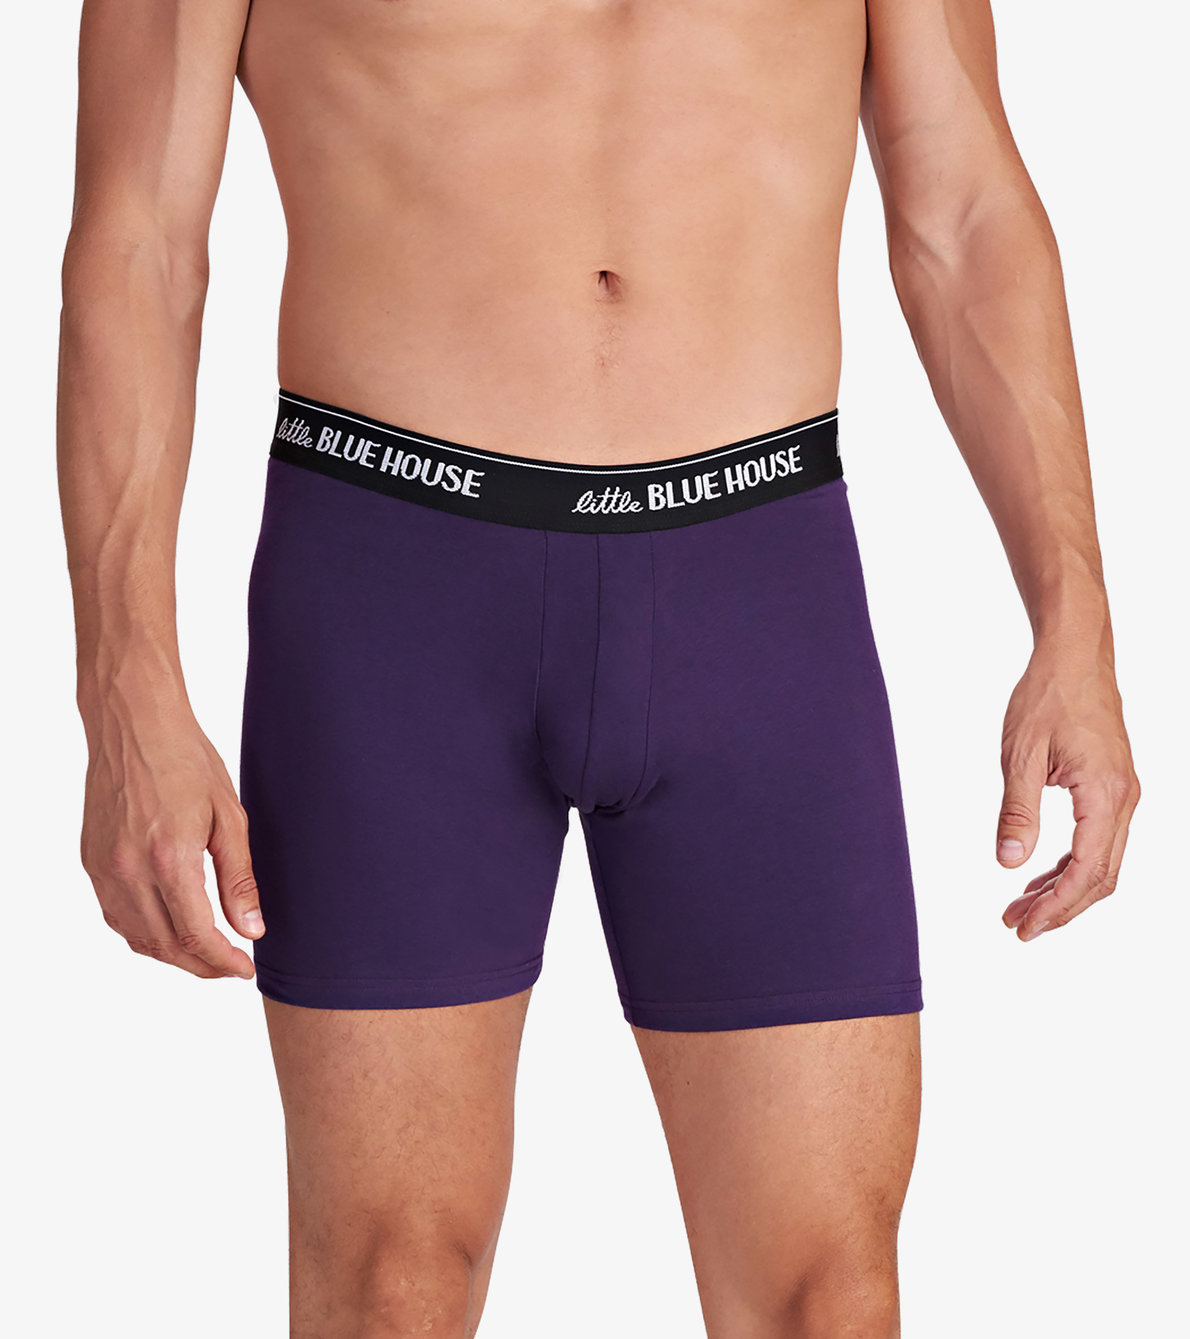 View larger image of Almoose Naked Men's Boxer Briefs